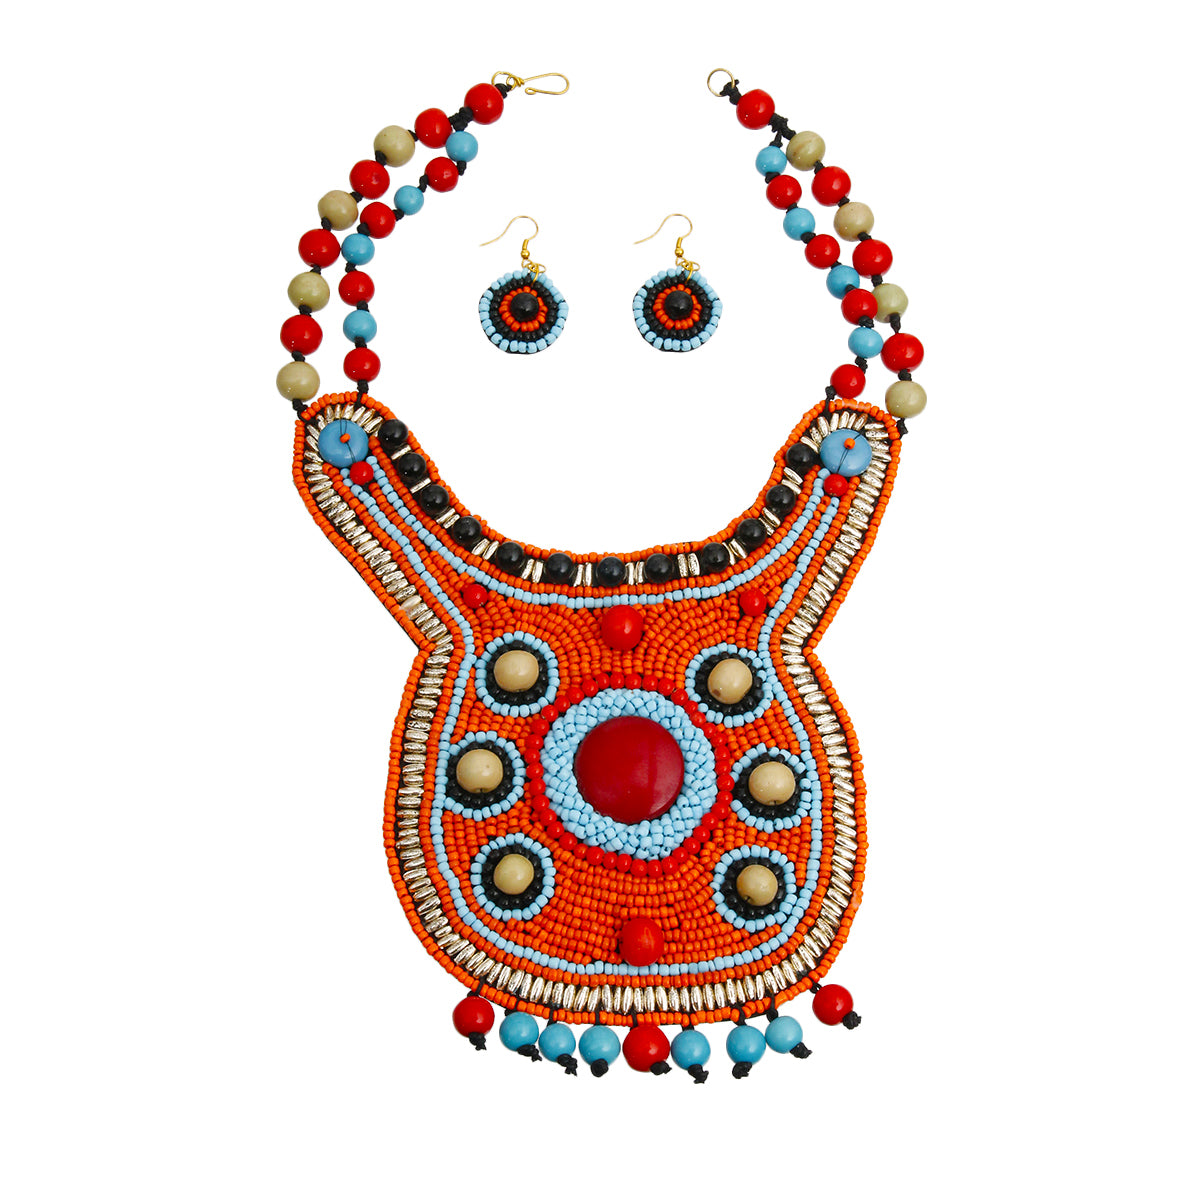 Orange Bead Bib Necklace Set with Blue Red and Green Bead Collar and Detail